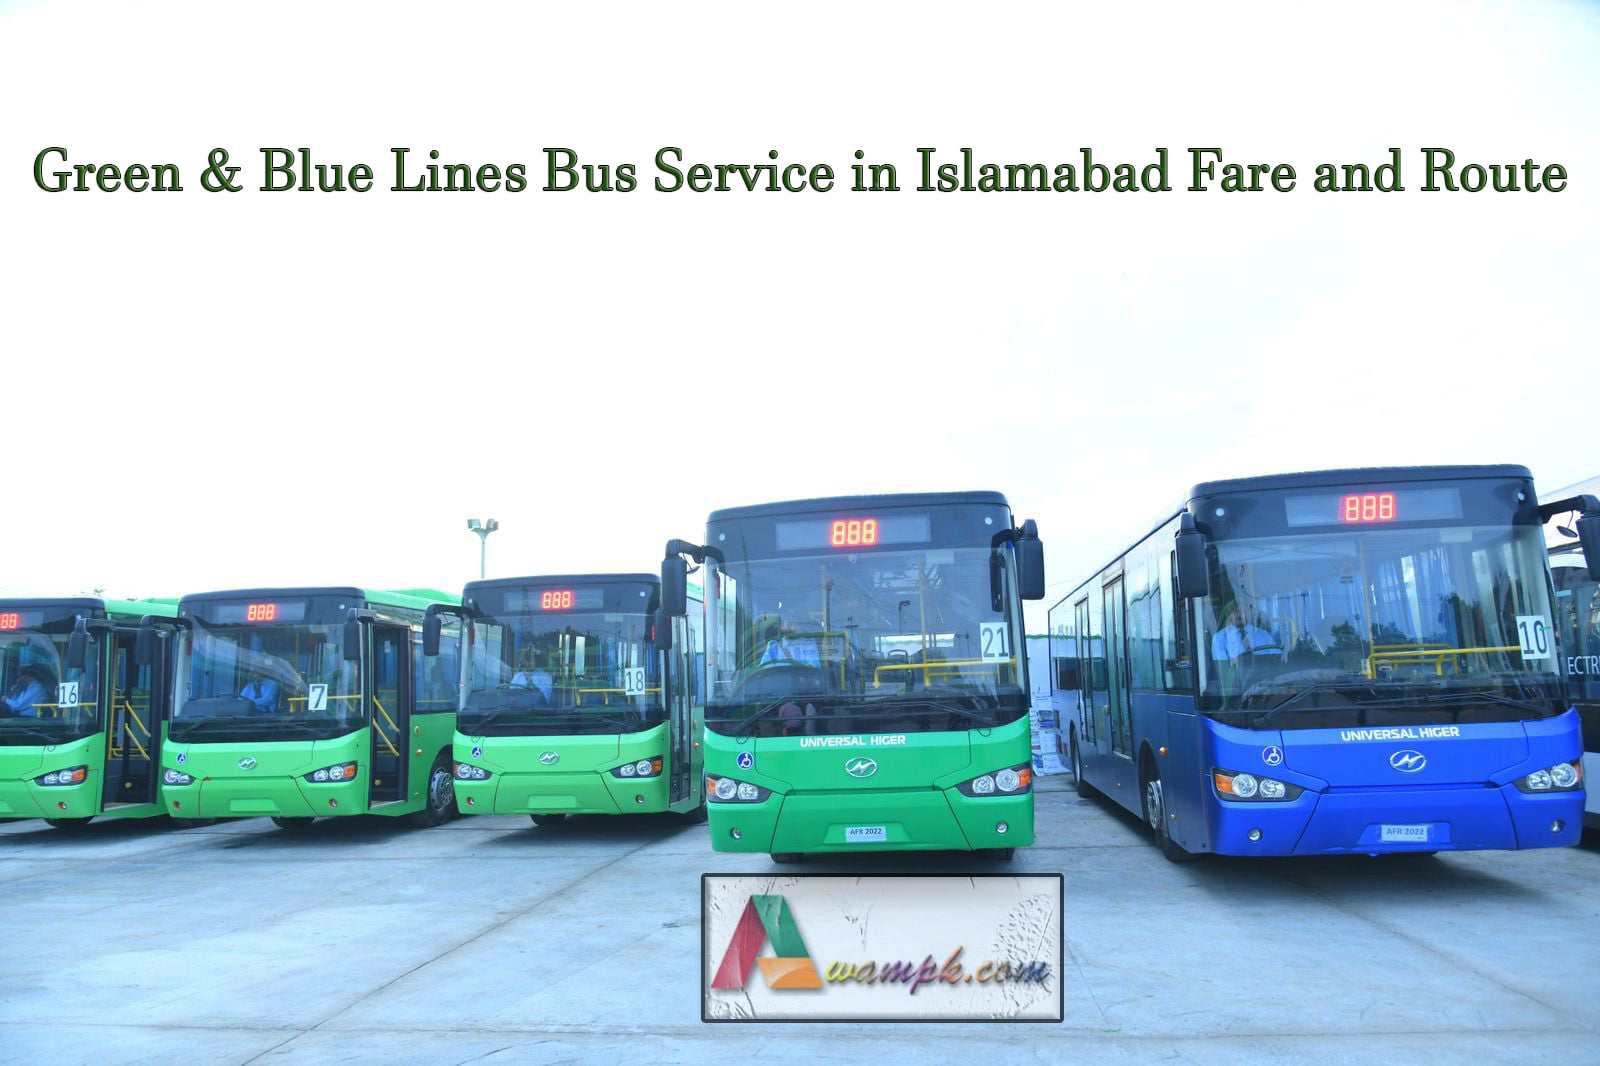 Green & Blue Lines Bus Service in Islamabad Fare and Routes